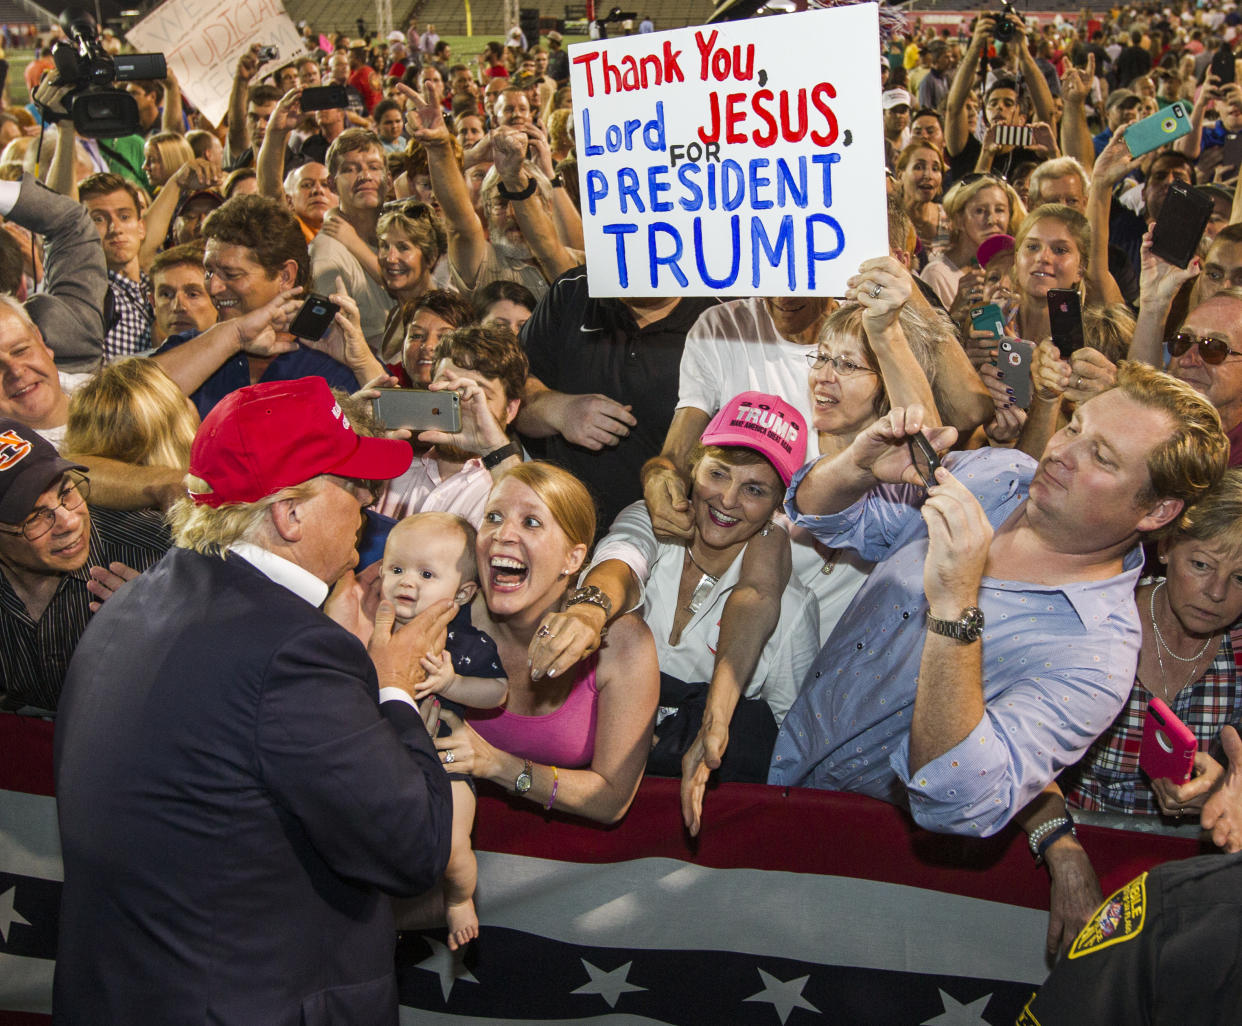 President Trump and supporters with a sign invoking religion. (Photo: Mark Wallheiser/Getty Images)